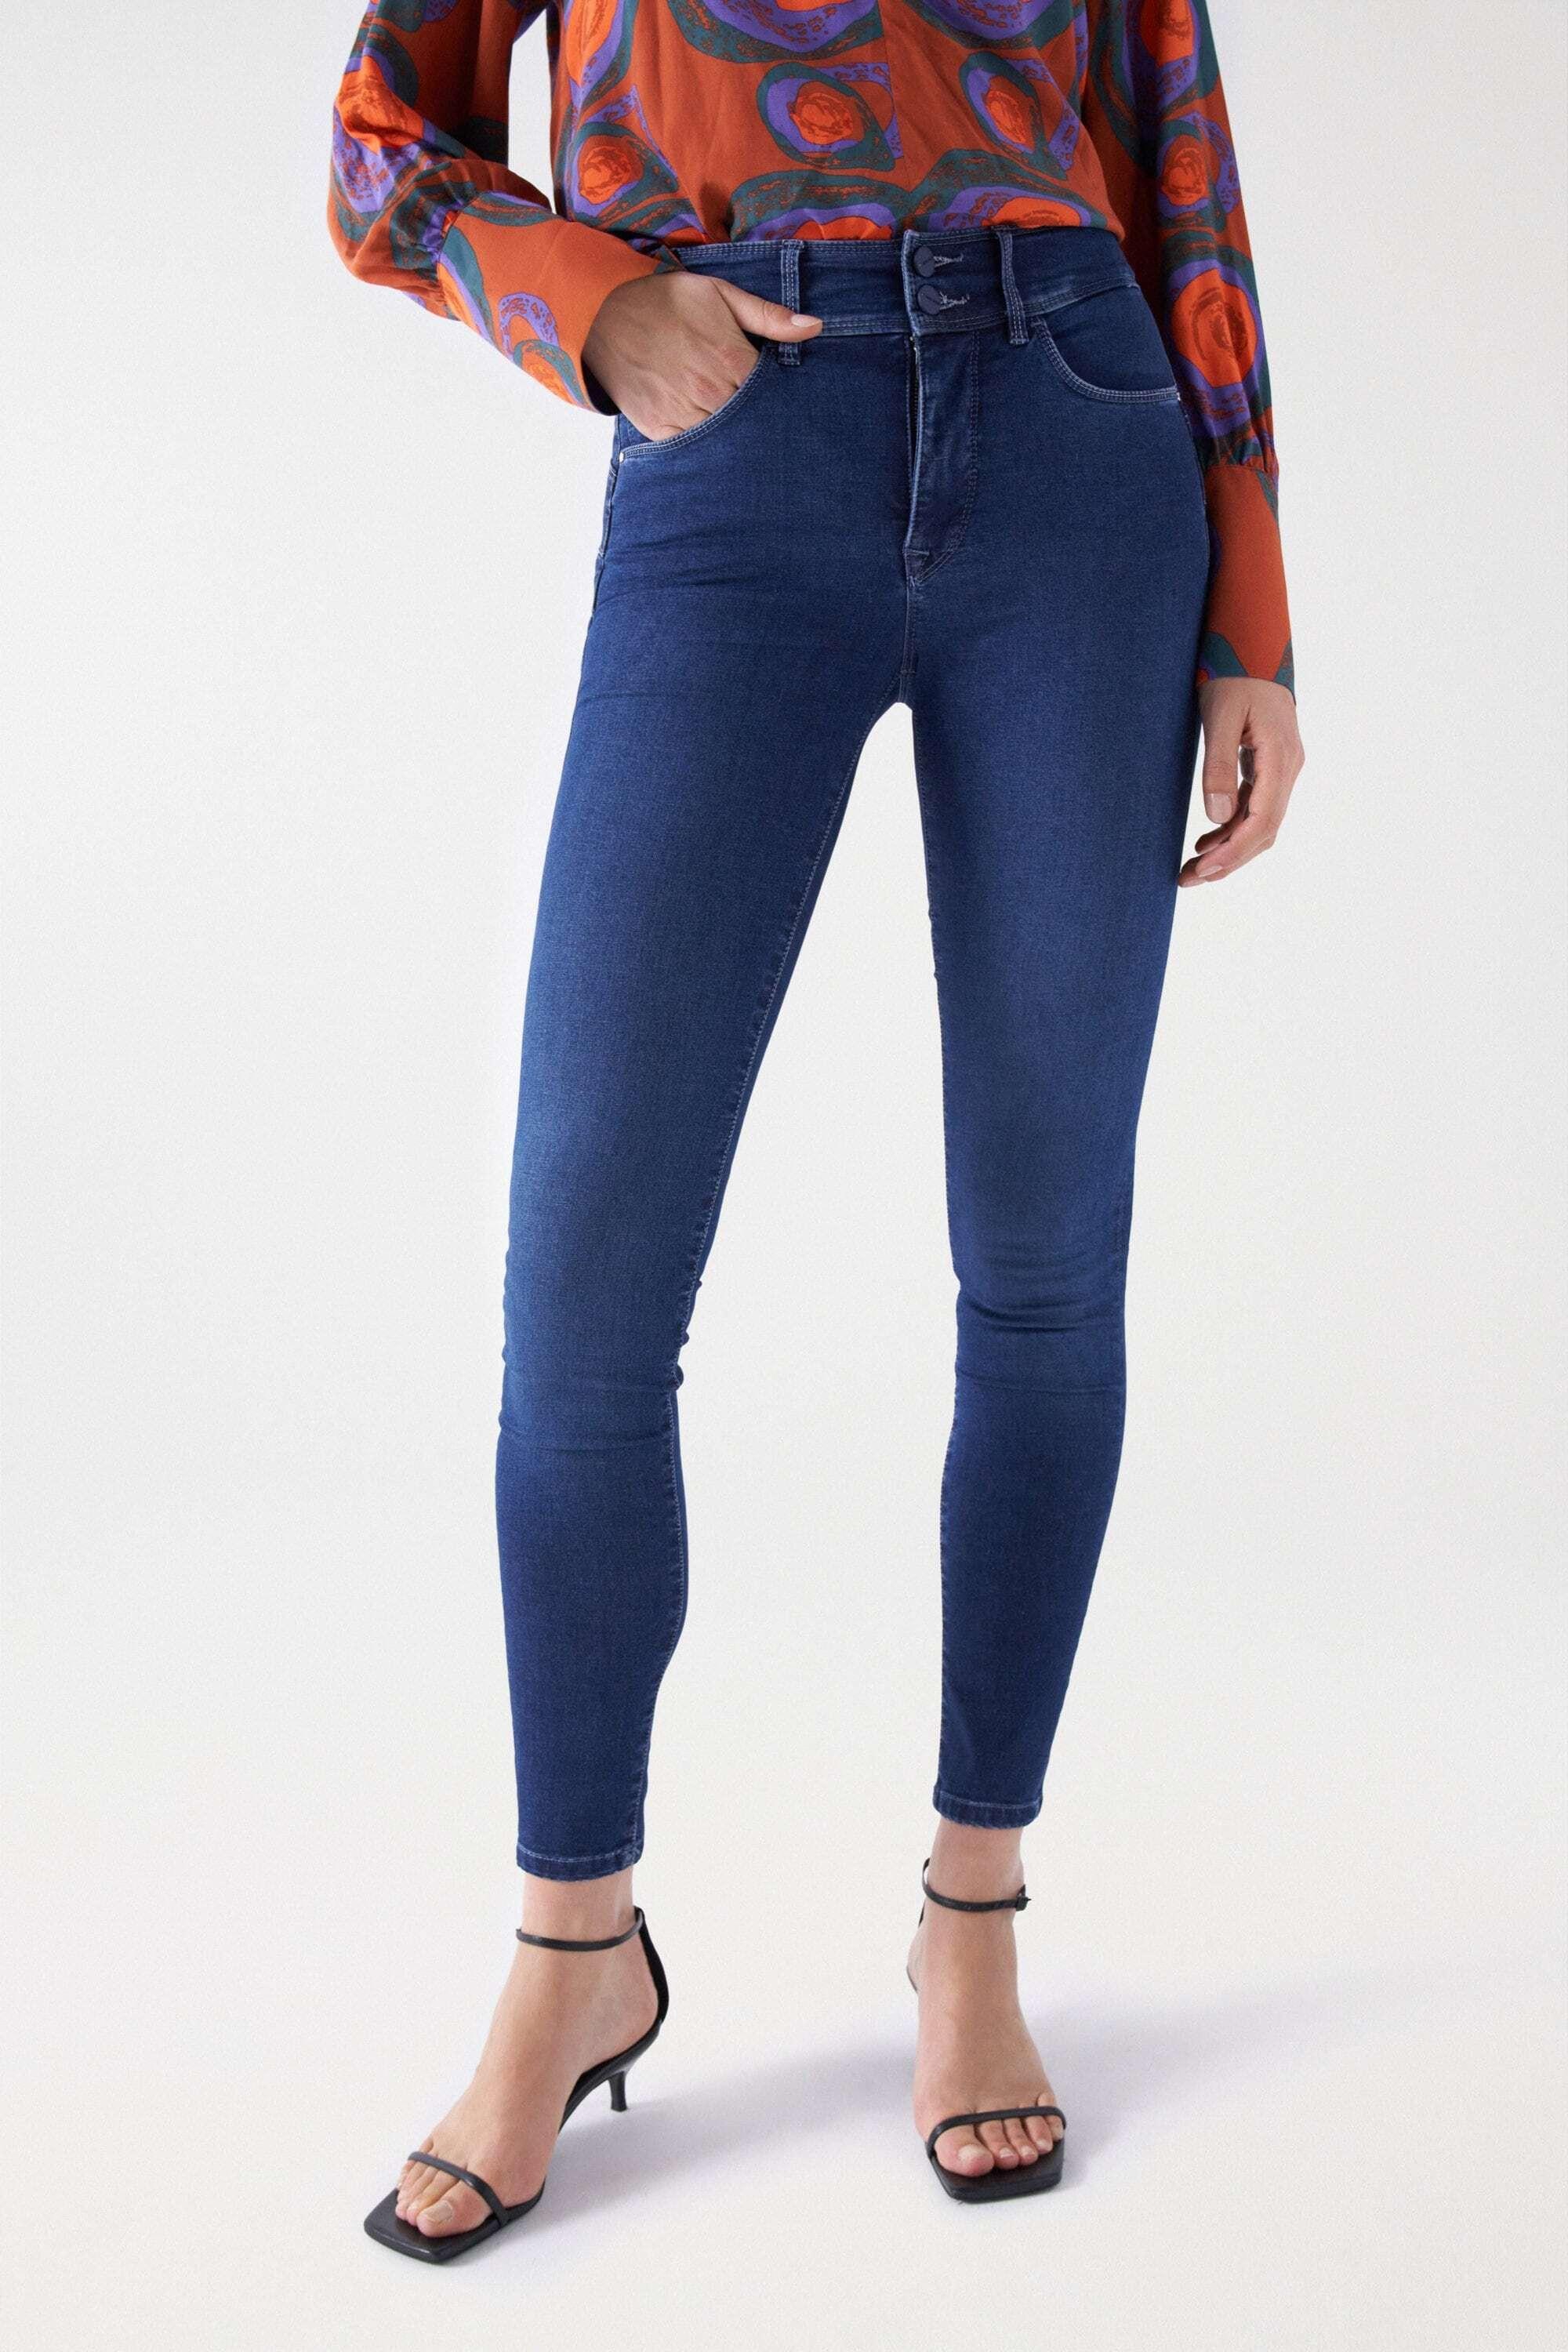 Salsa  Jeans Secret With Embroidery 